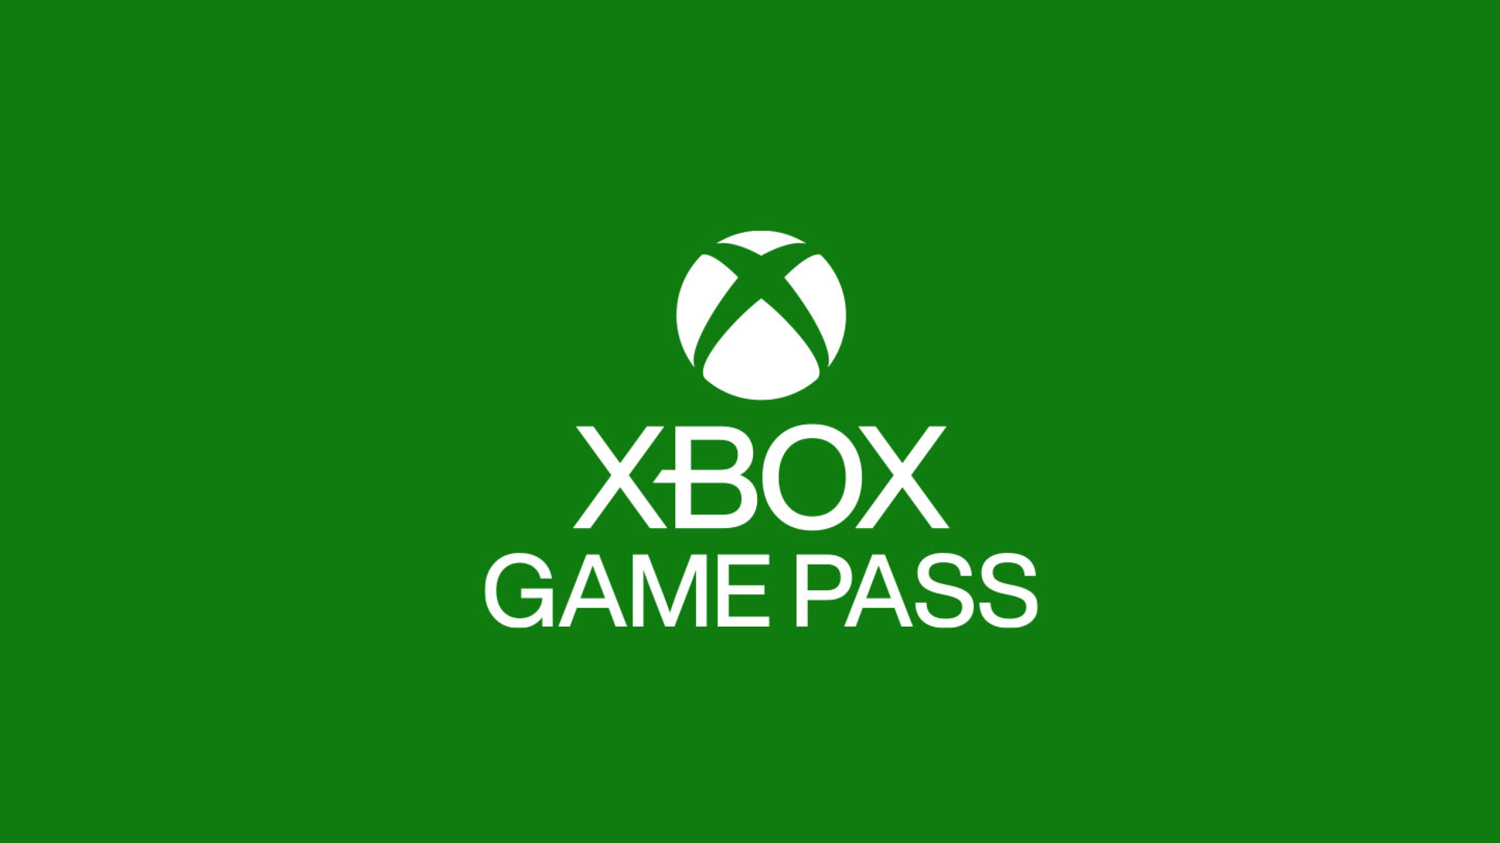 Microsoft Launches its PC Game Pass in Preview in 40 New Countries -  MySmartPrice